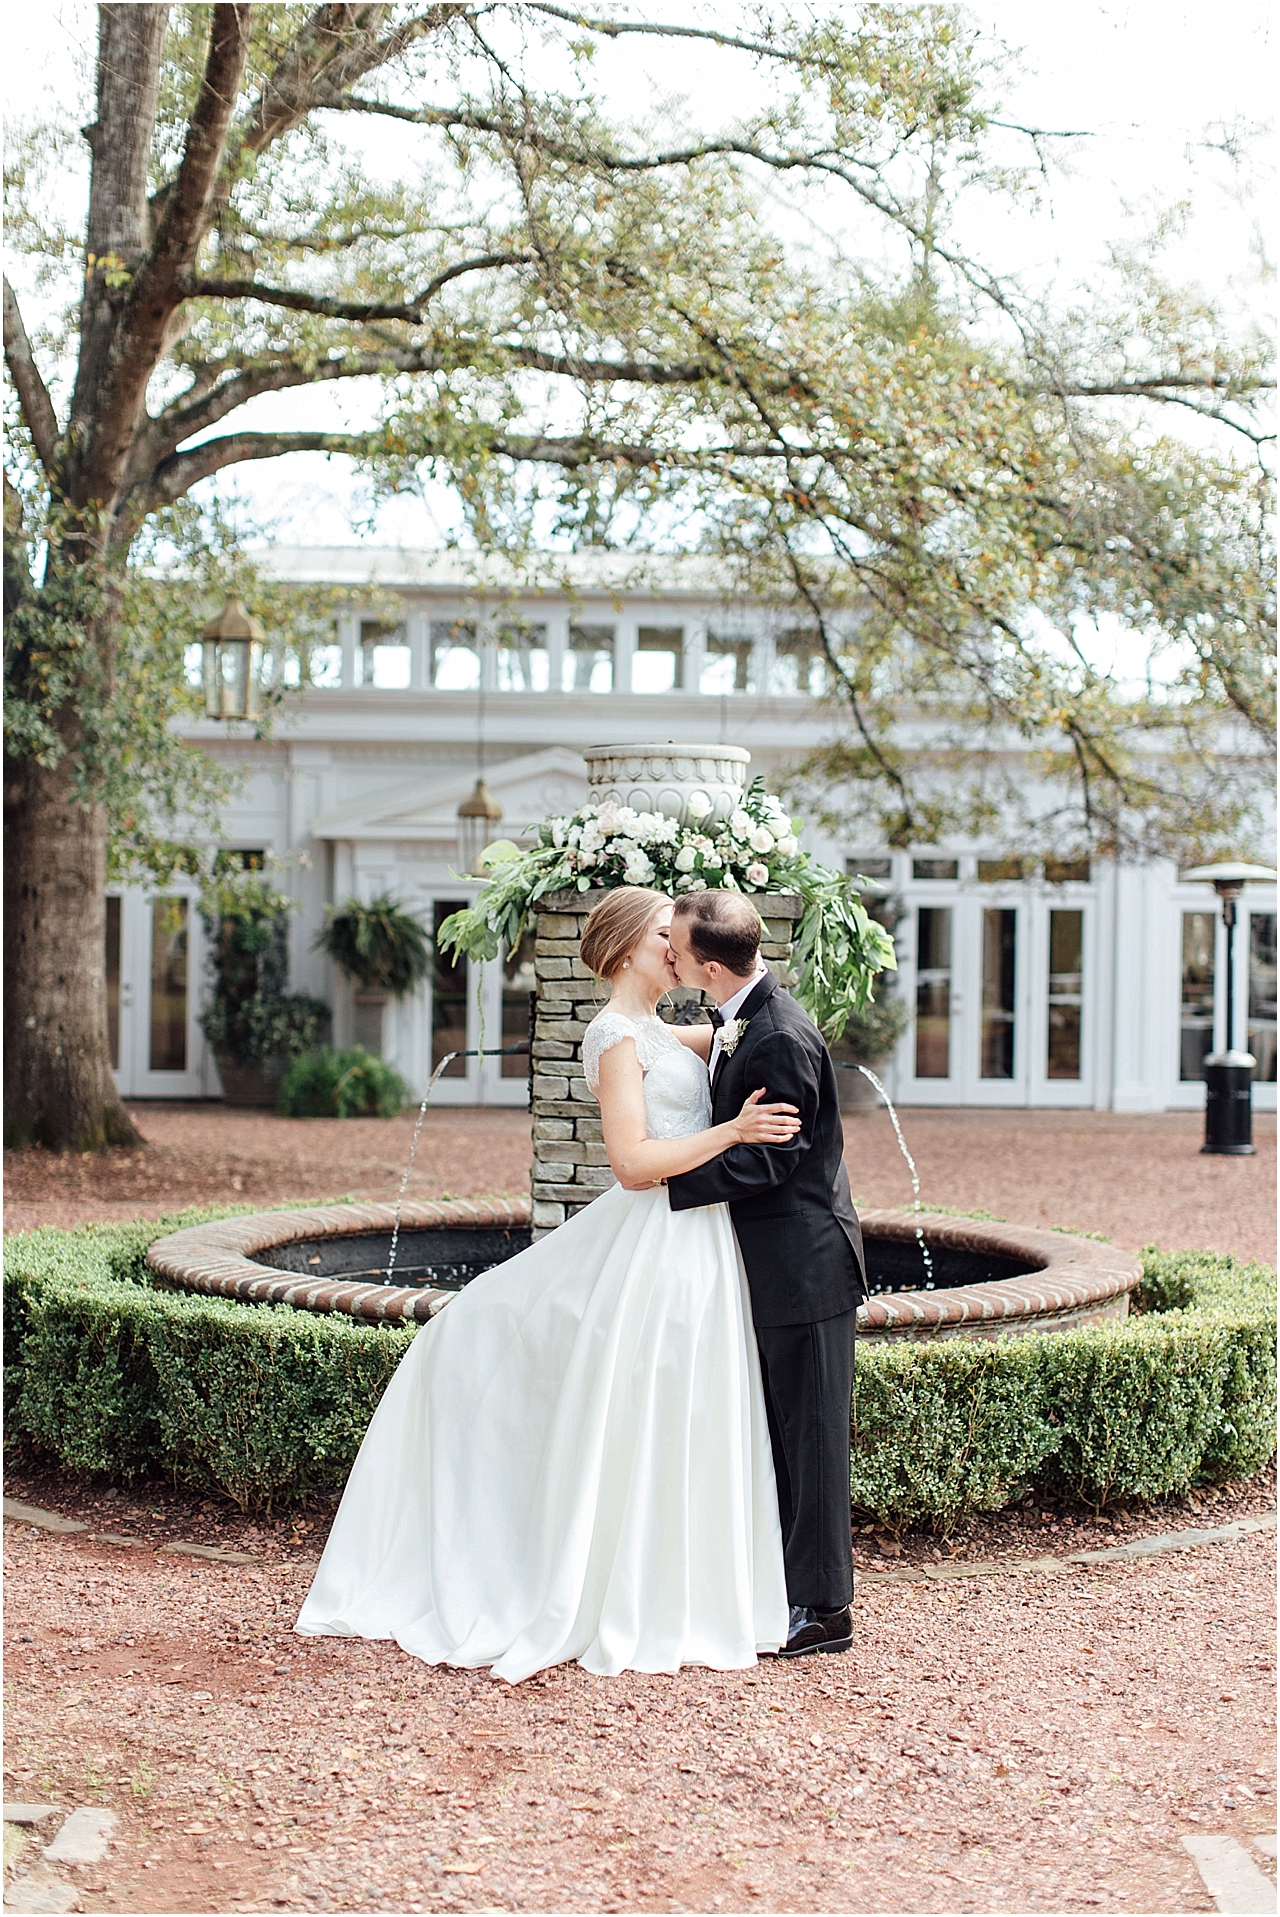  lindsey ann photography, the oaks centreville al, the oaks weddings, alabama wedding photographer, birmingham wedding photographer, winter wedding, brook and the bluff, lindsey ann photo, ice cream wedding 